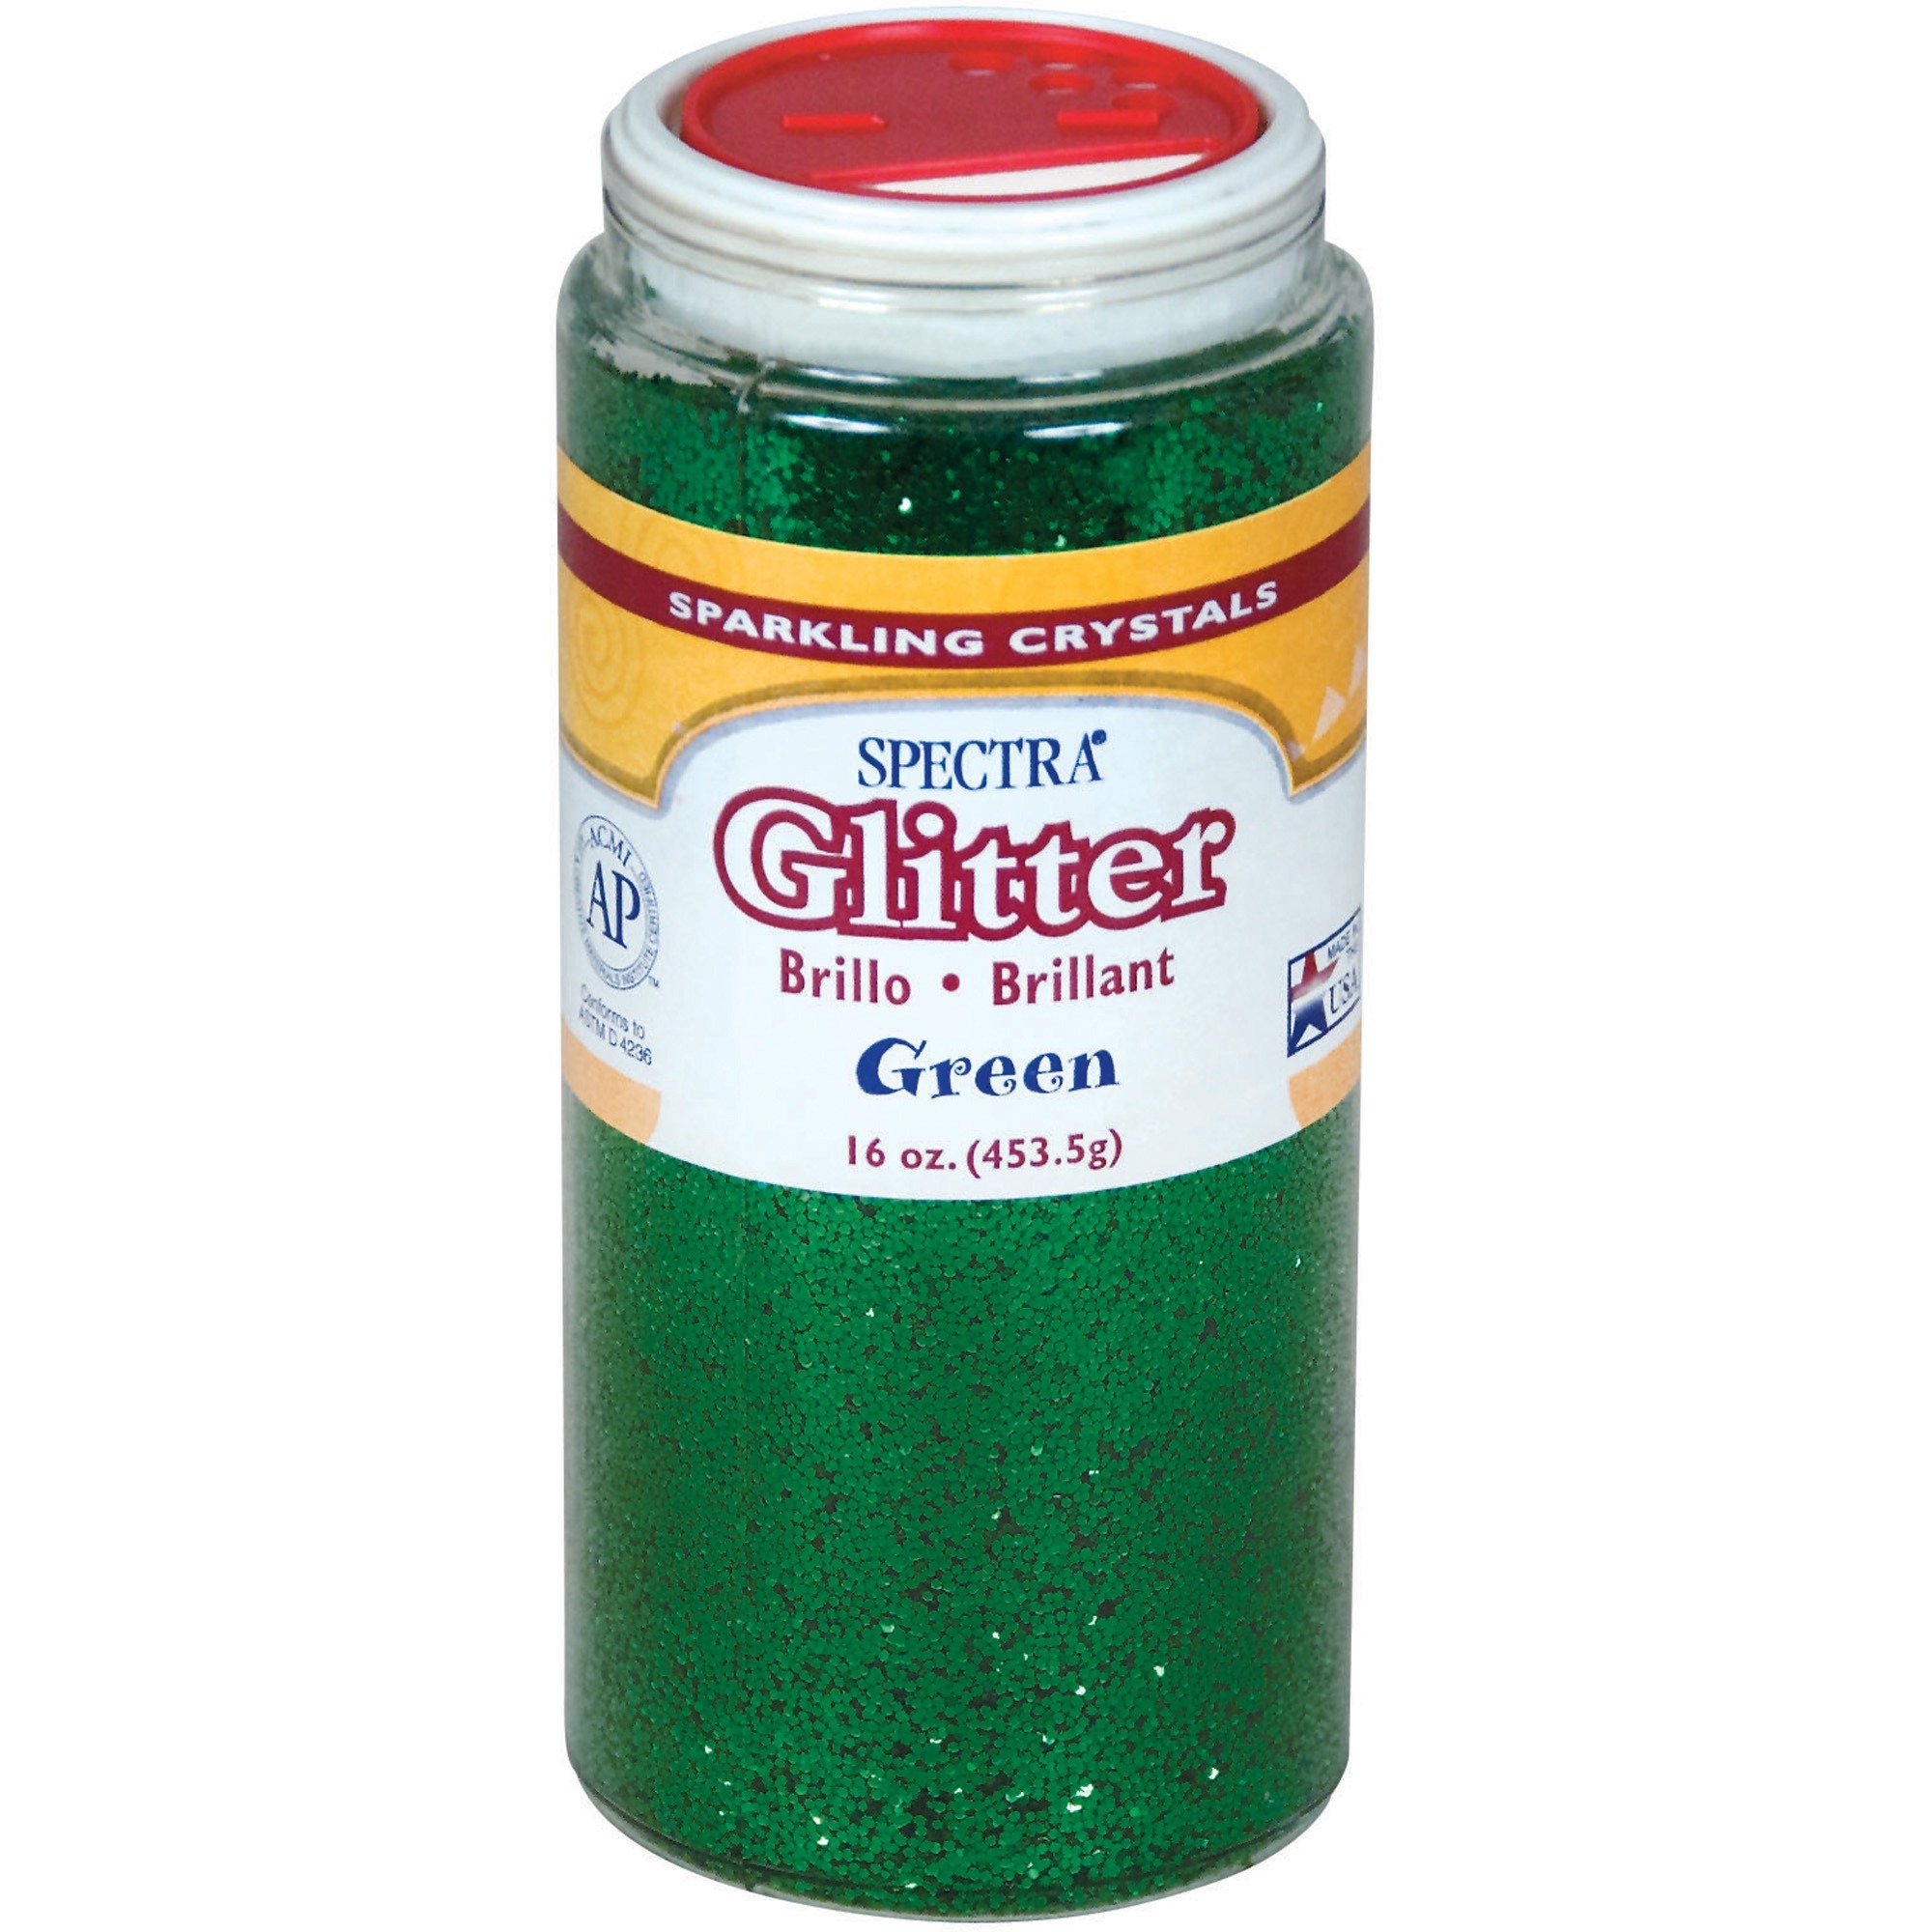 Pacon® Spectra® Glitter Sparkling Crystals, 1 lb., Green - image 3 of 3